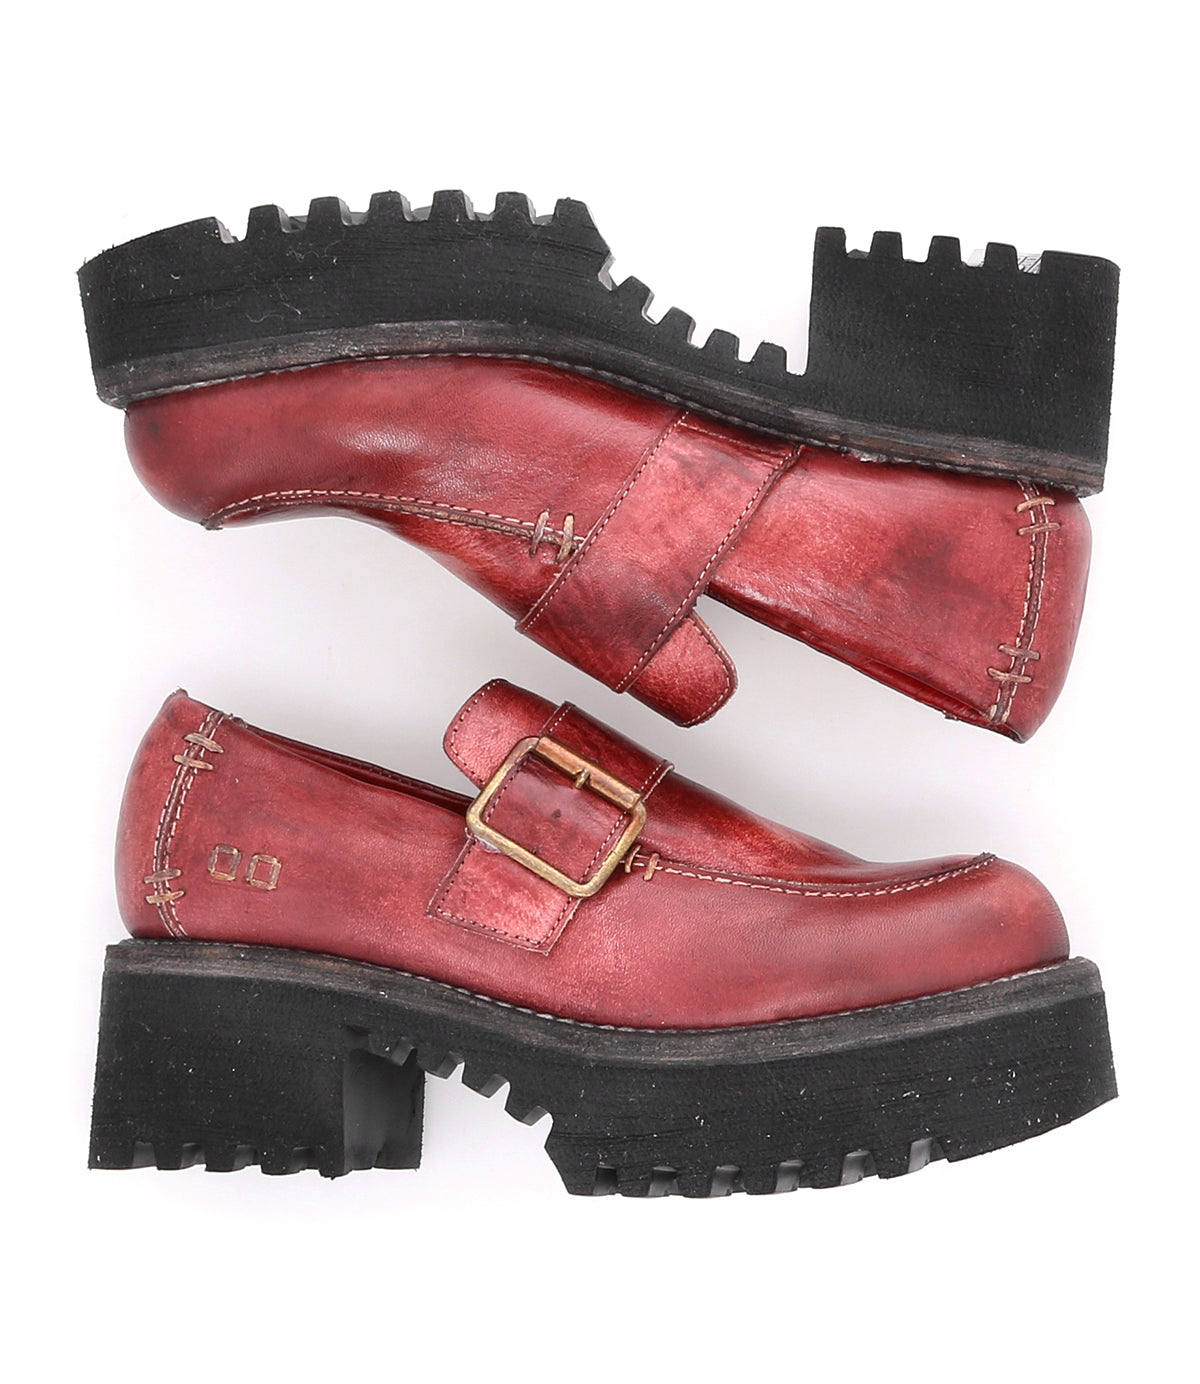 A pair of Kavi red leather loafers with black buckles, perfect for fall fashion. Brand: Bed Stu.